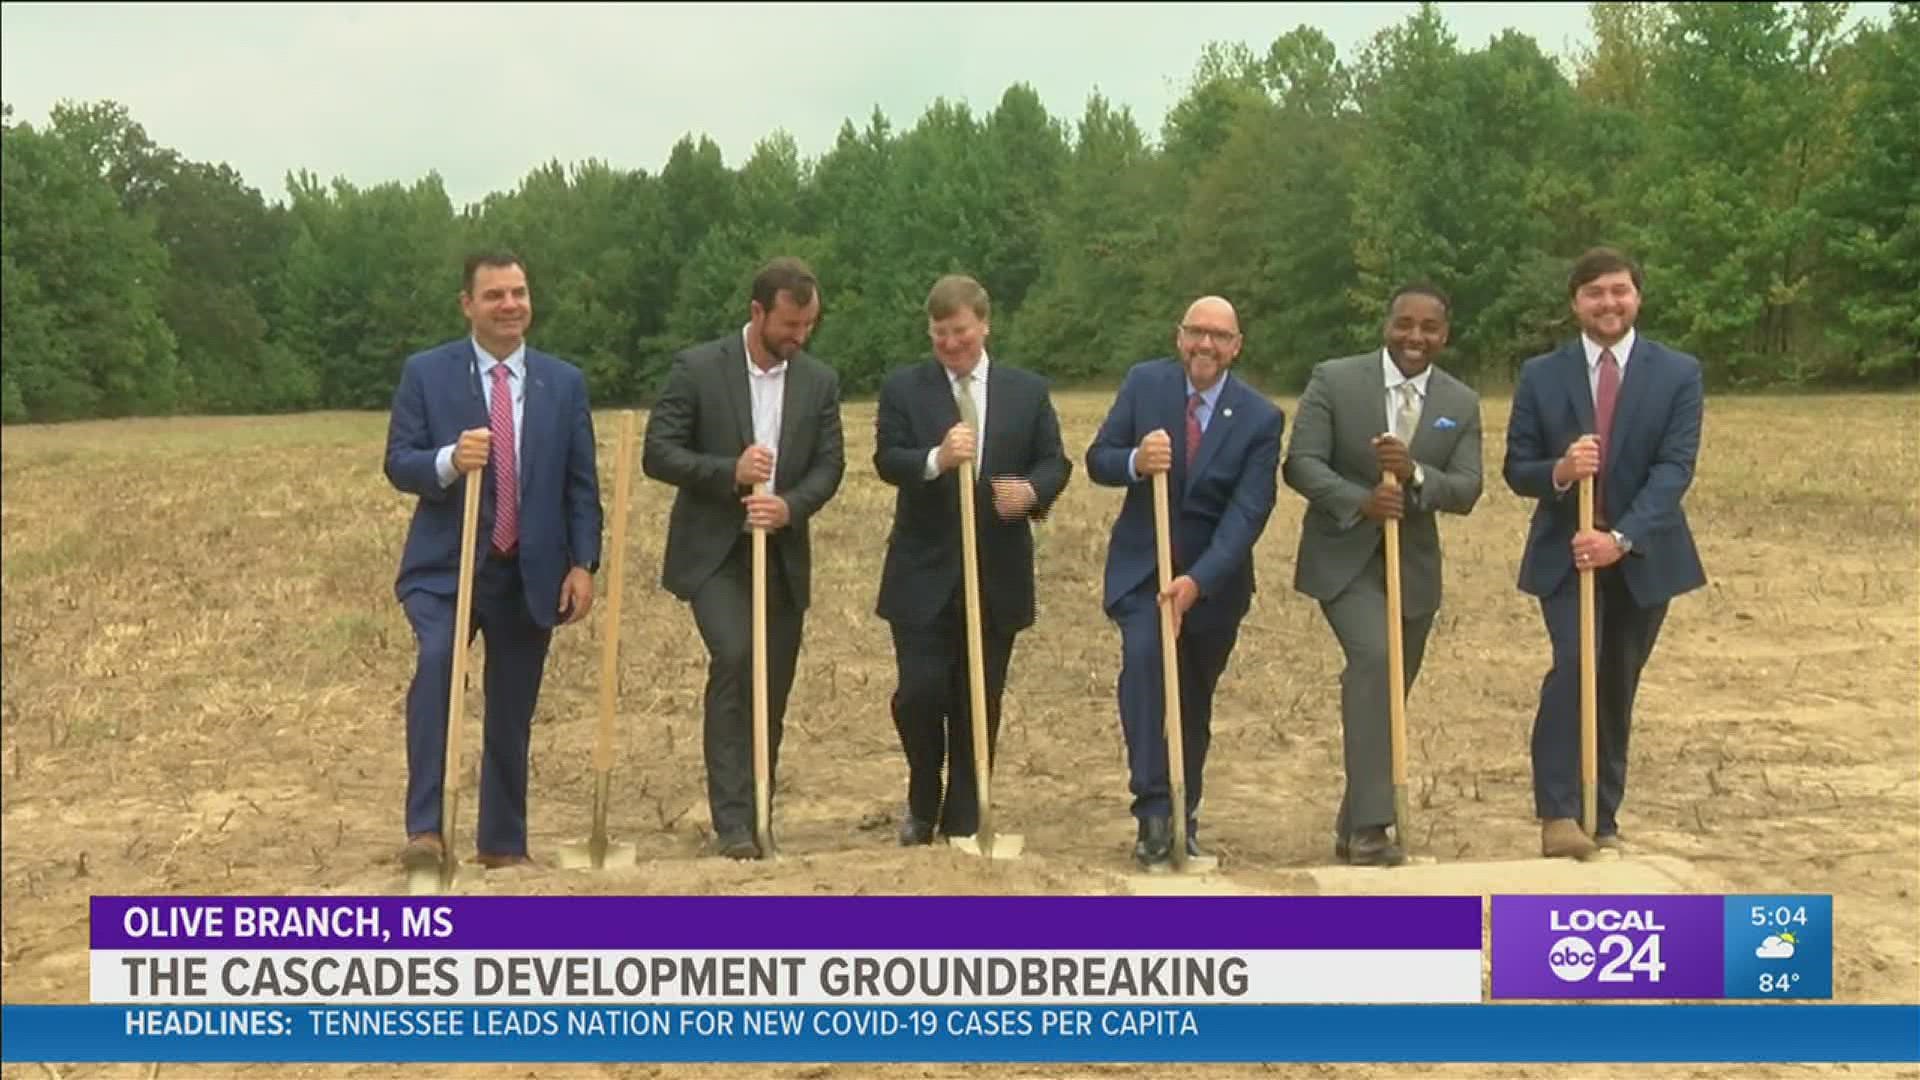 Mississippi Governor Tate Reeves was in Olive Branch, Mississippi, Wednesday for the Cascades Development groundbreaking ceremony.